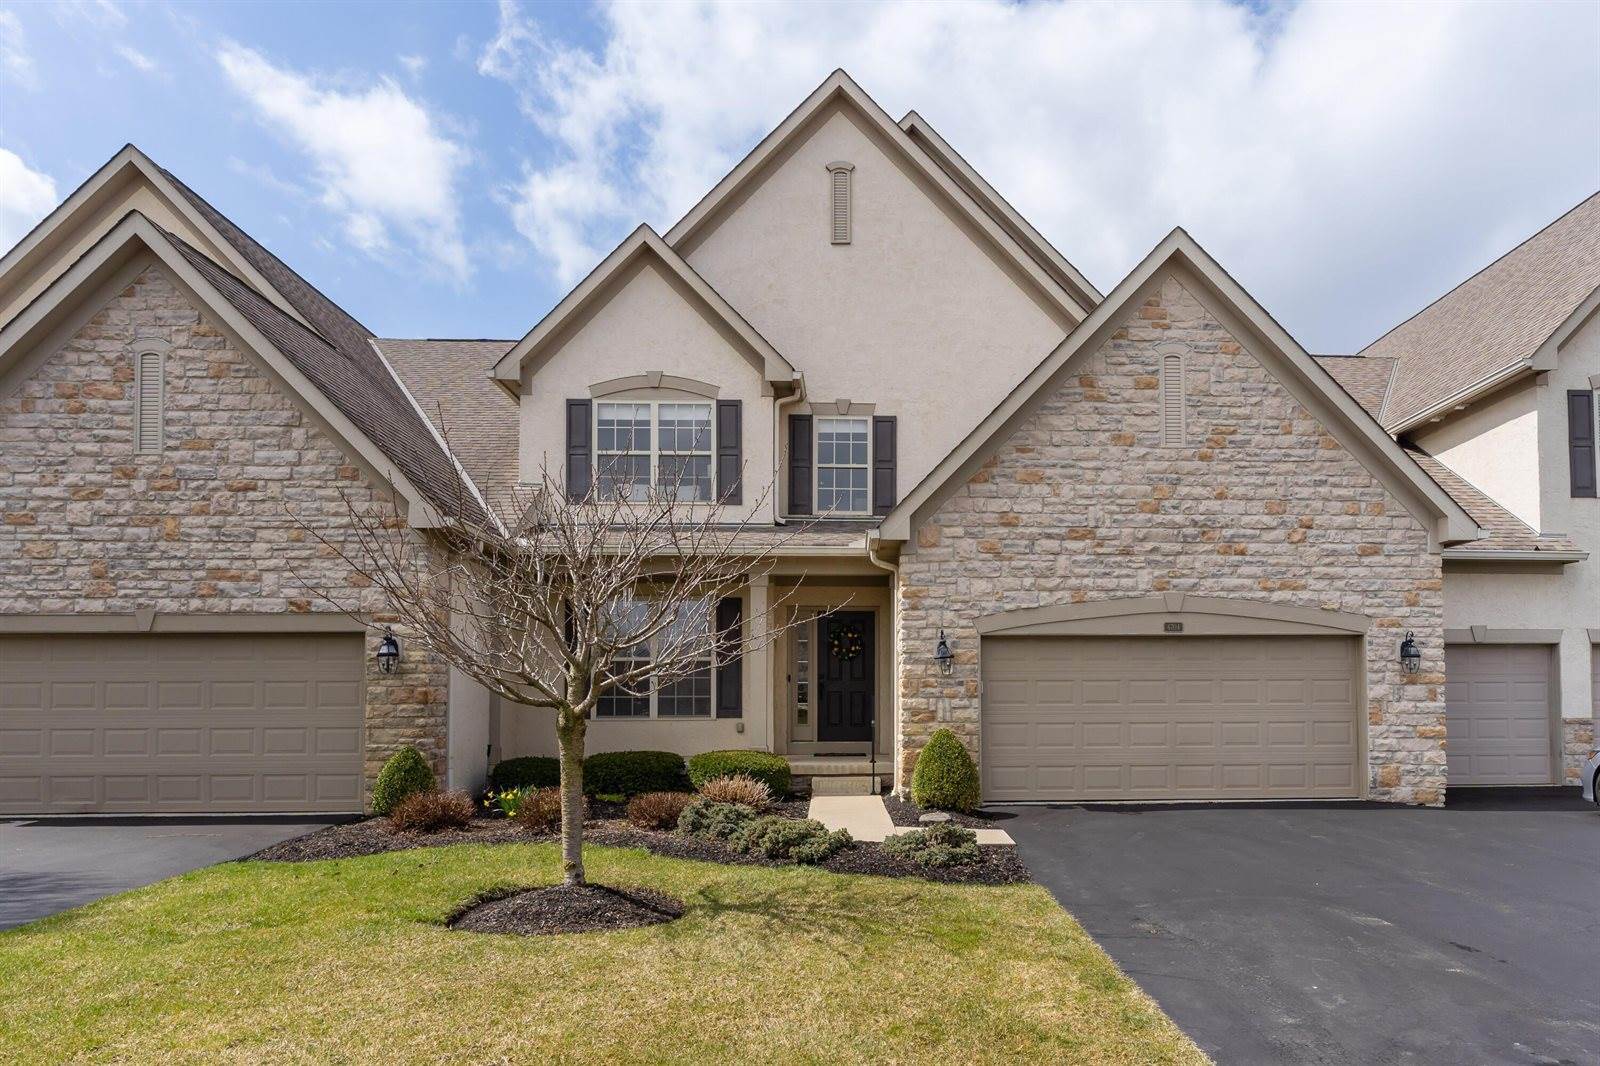 6704 Knoll View Court, Powell, OH 43065